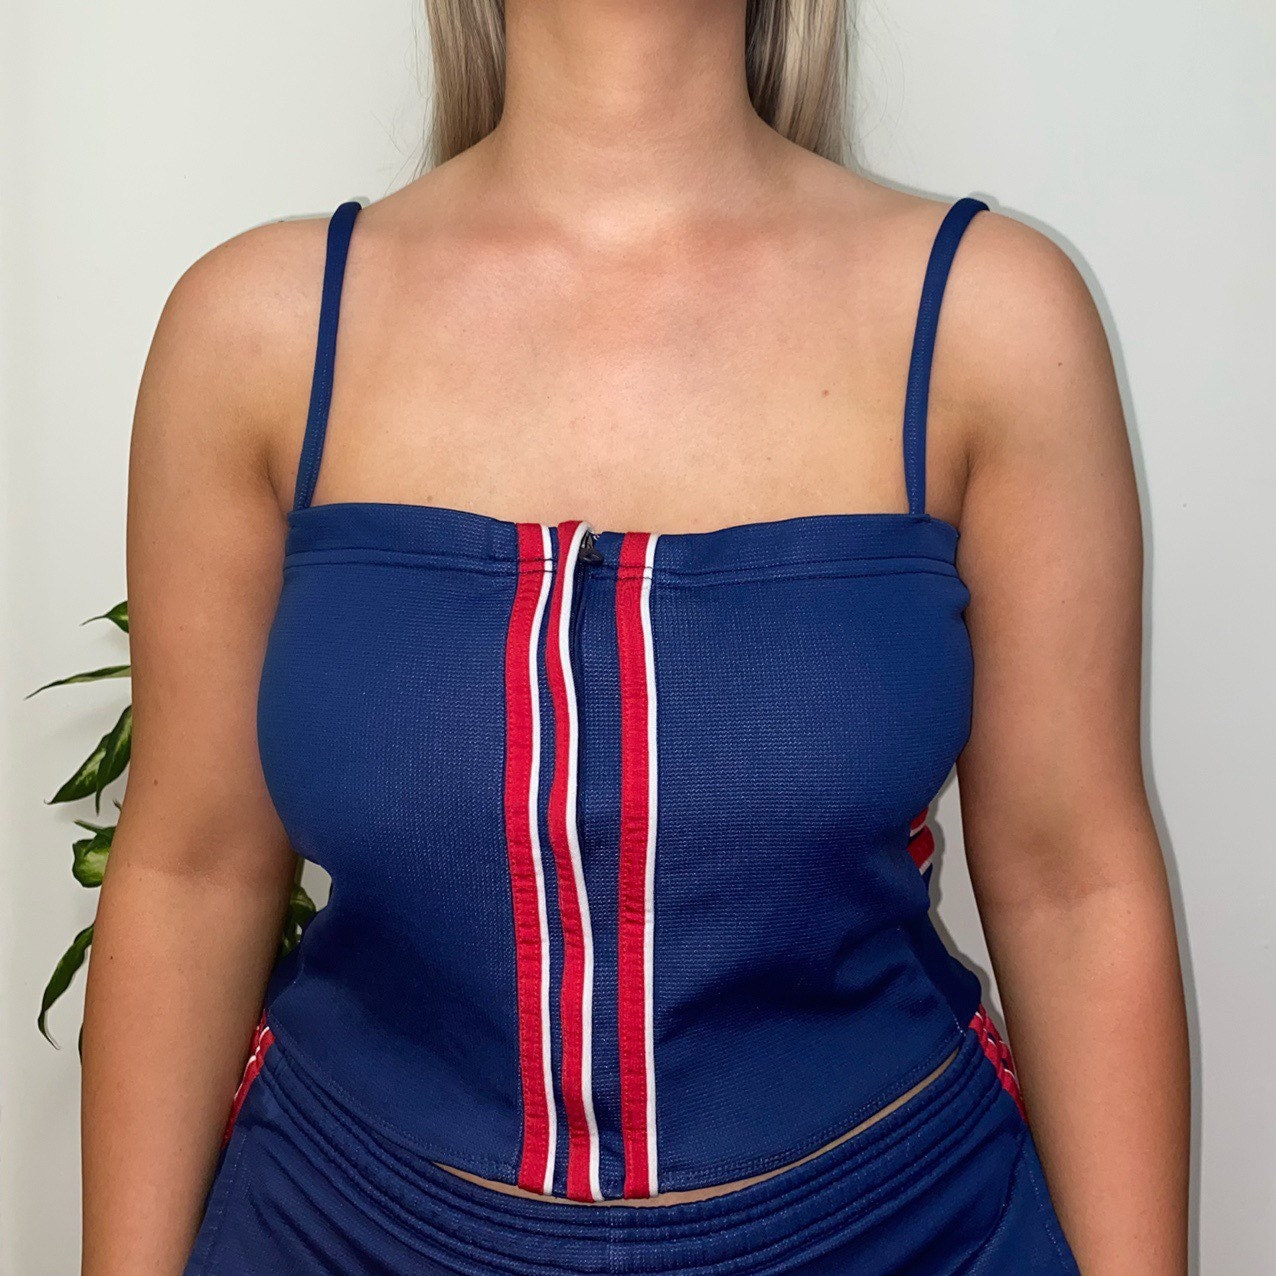 close up of model wearing blue and red strappy corset top with 3 red stripes and matching skirt